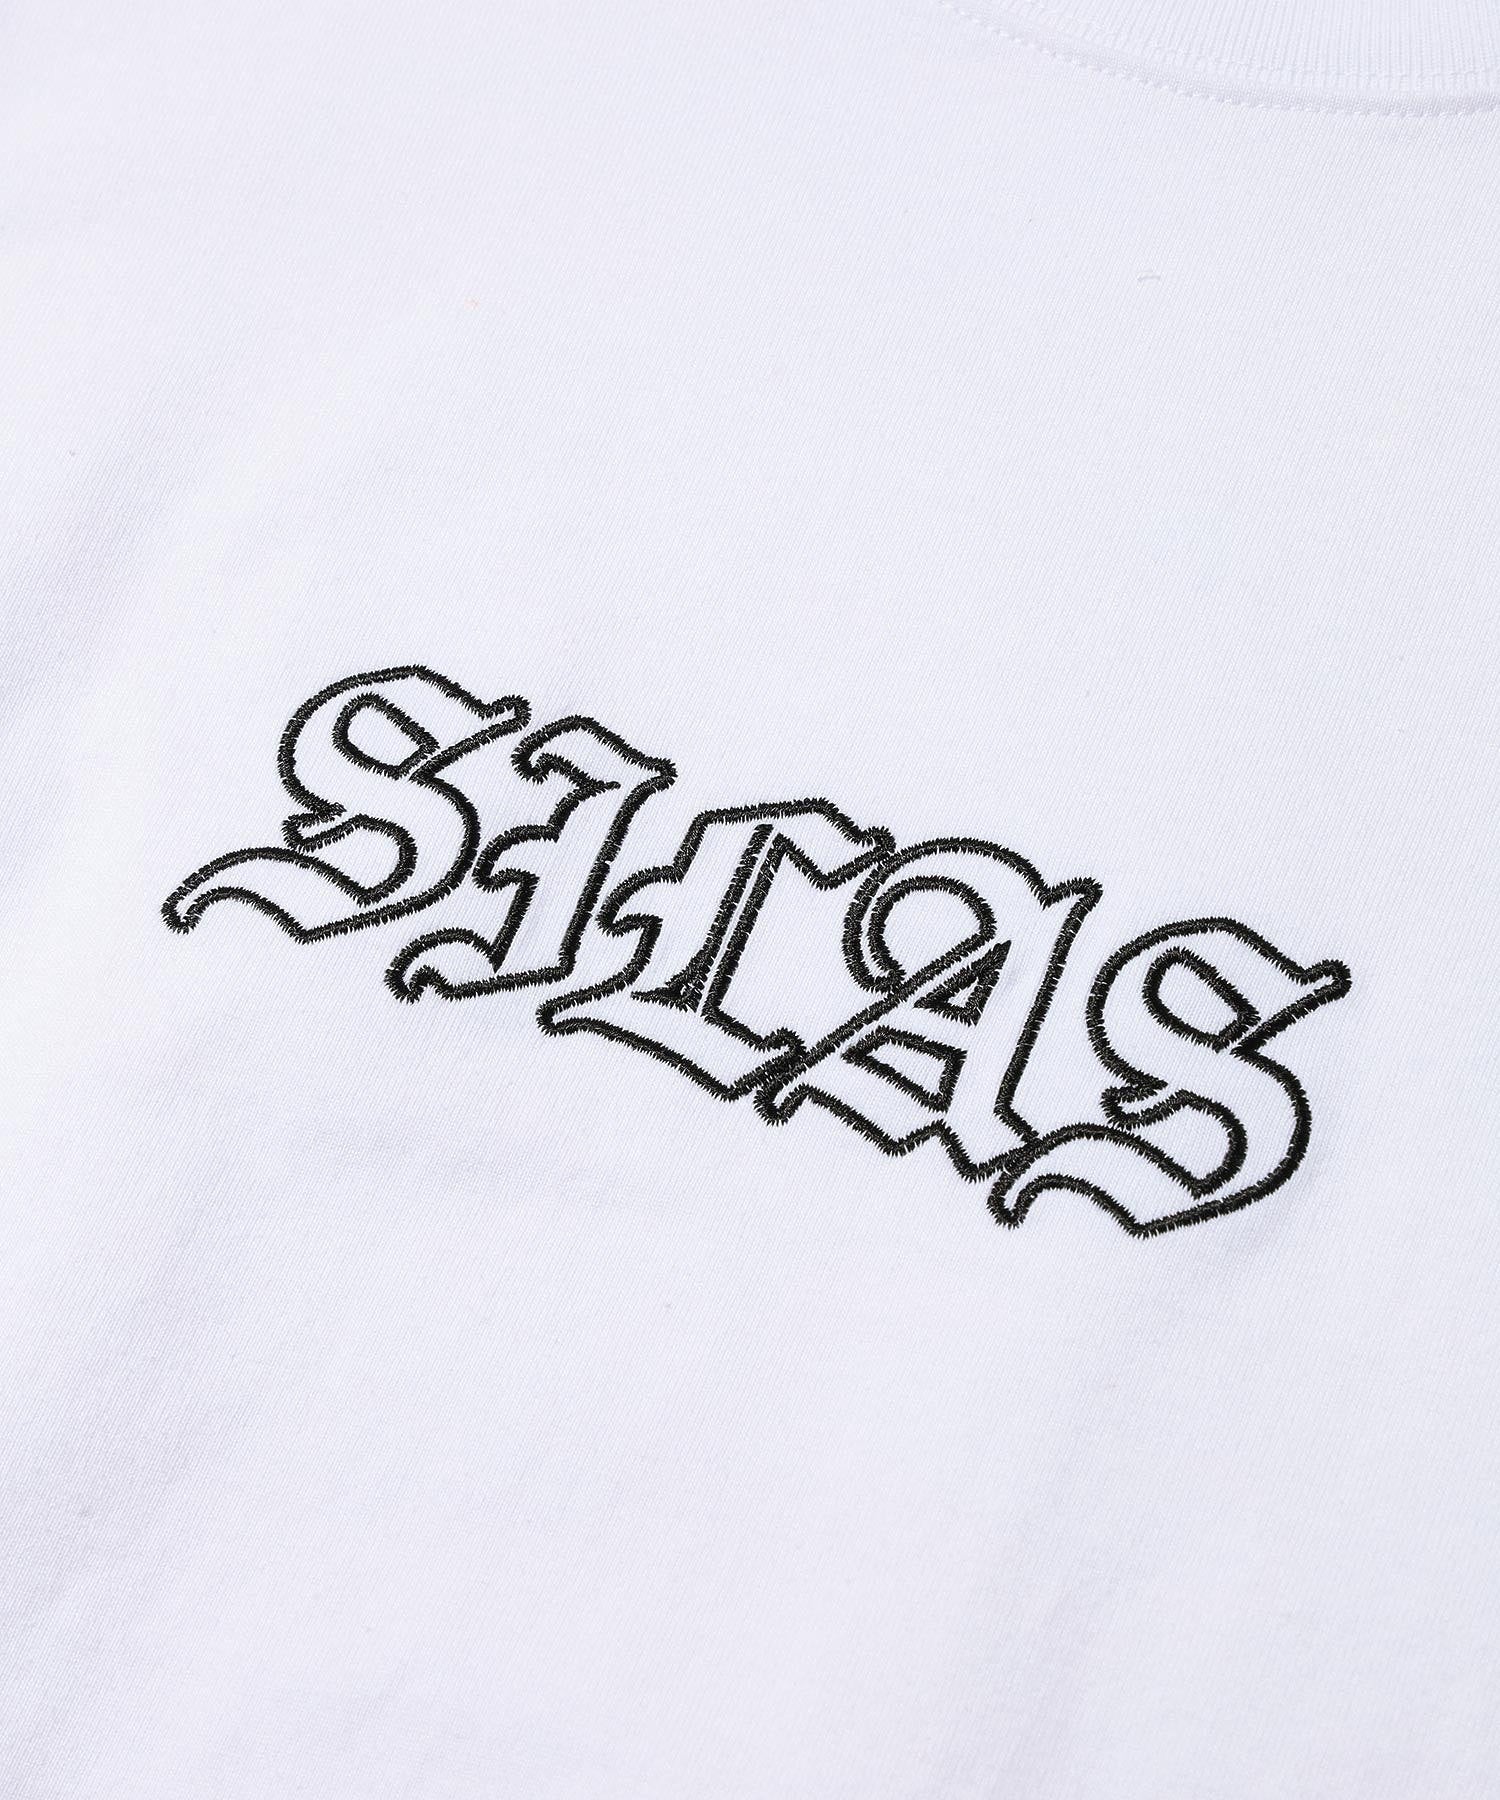 EMBROIDERY LOGO WIDE S/S TEE SILAS